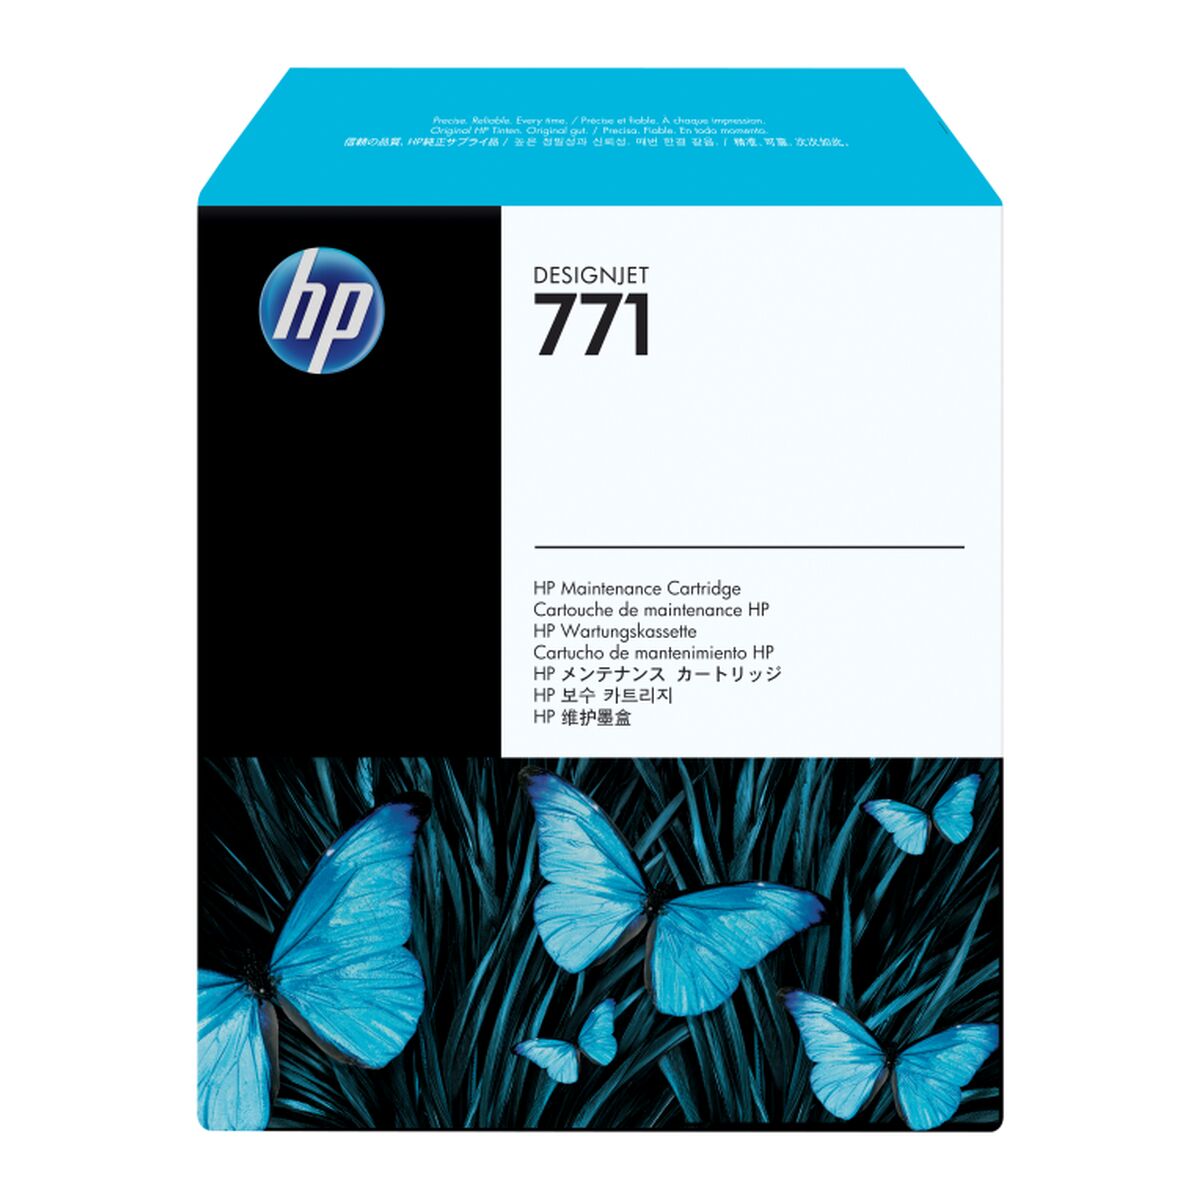 Printer HP 771, HP, Computing, Printers and accessories, printer-hp-771, Brand_HP, category-reference-2609, category-reference-2642, category-reference-2645, category-reference-t-19685, category-reference-t-19911, category-reference-t-21377, category-reference-t-25676, computers / peripherals, Condition_NEW, office, Price_100 - 200, Teleworking, RiotNook